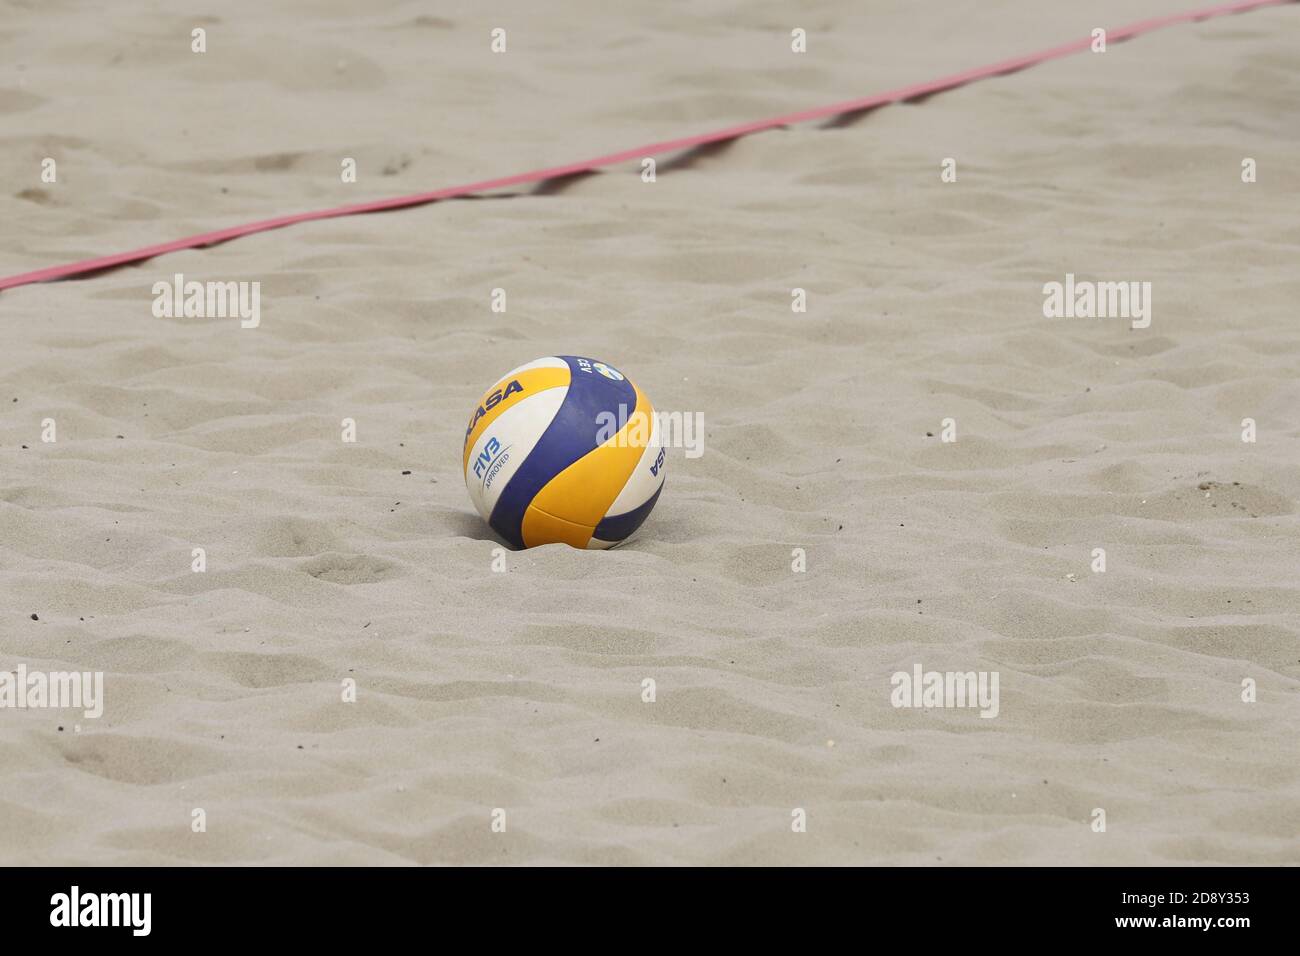 Alamy Pamucak images - photography stock and beach hi-res